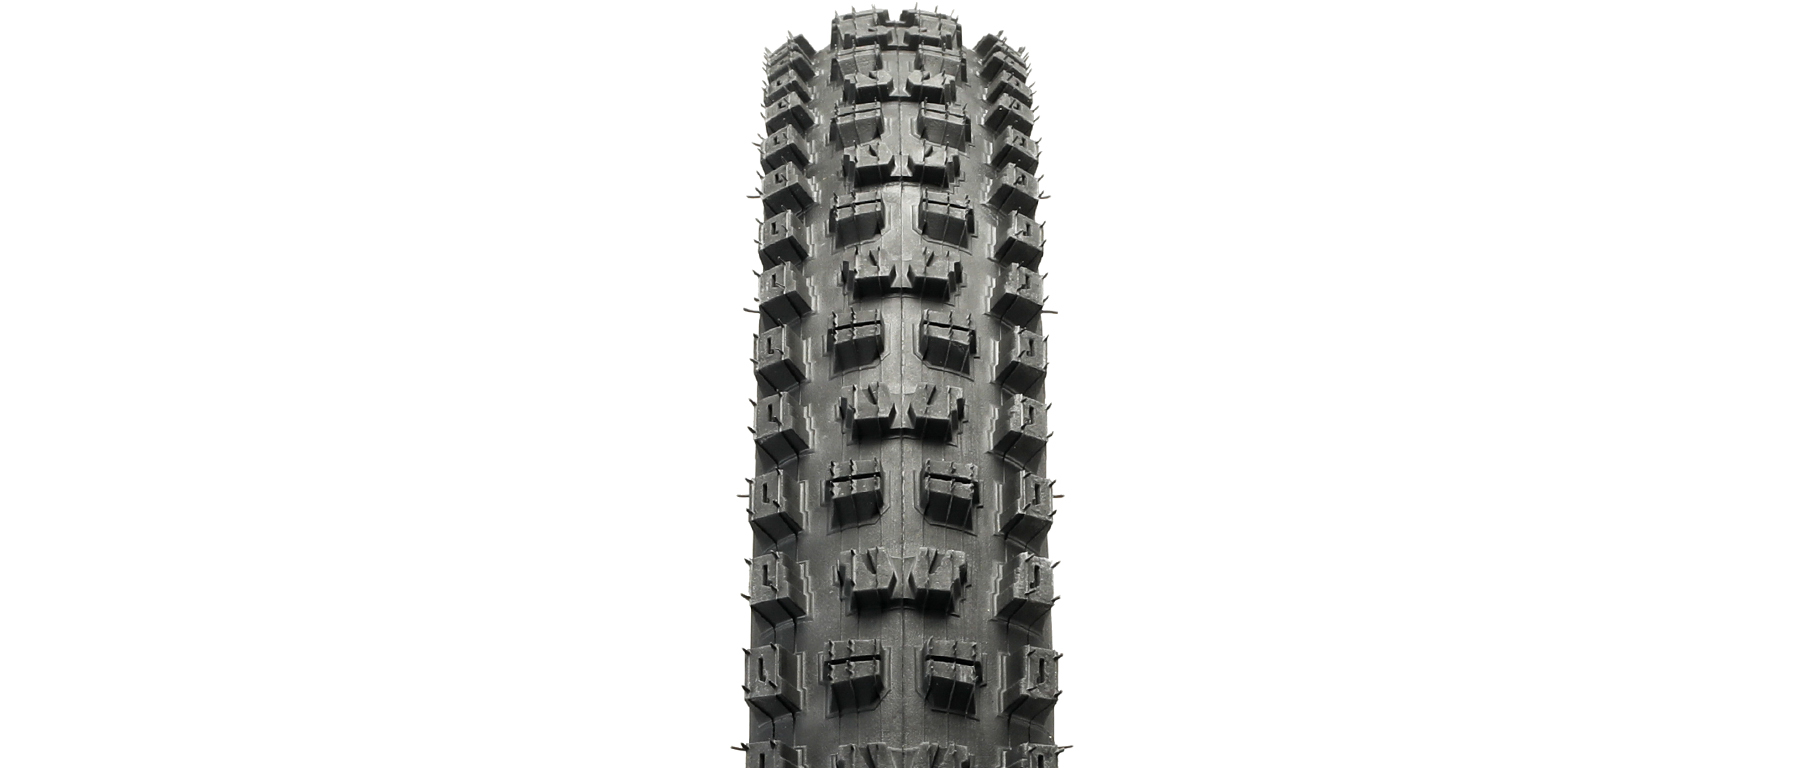 Specialized Butcher GRID 2Bliss Ready T7 Tire